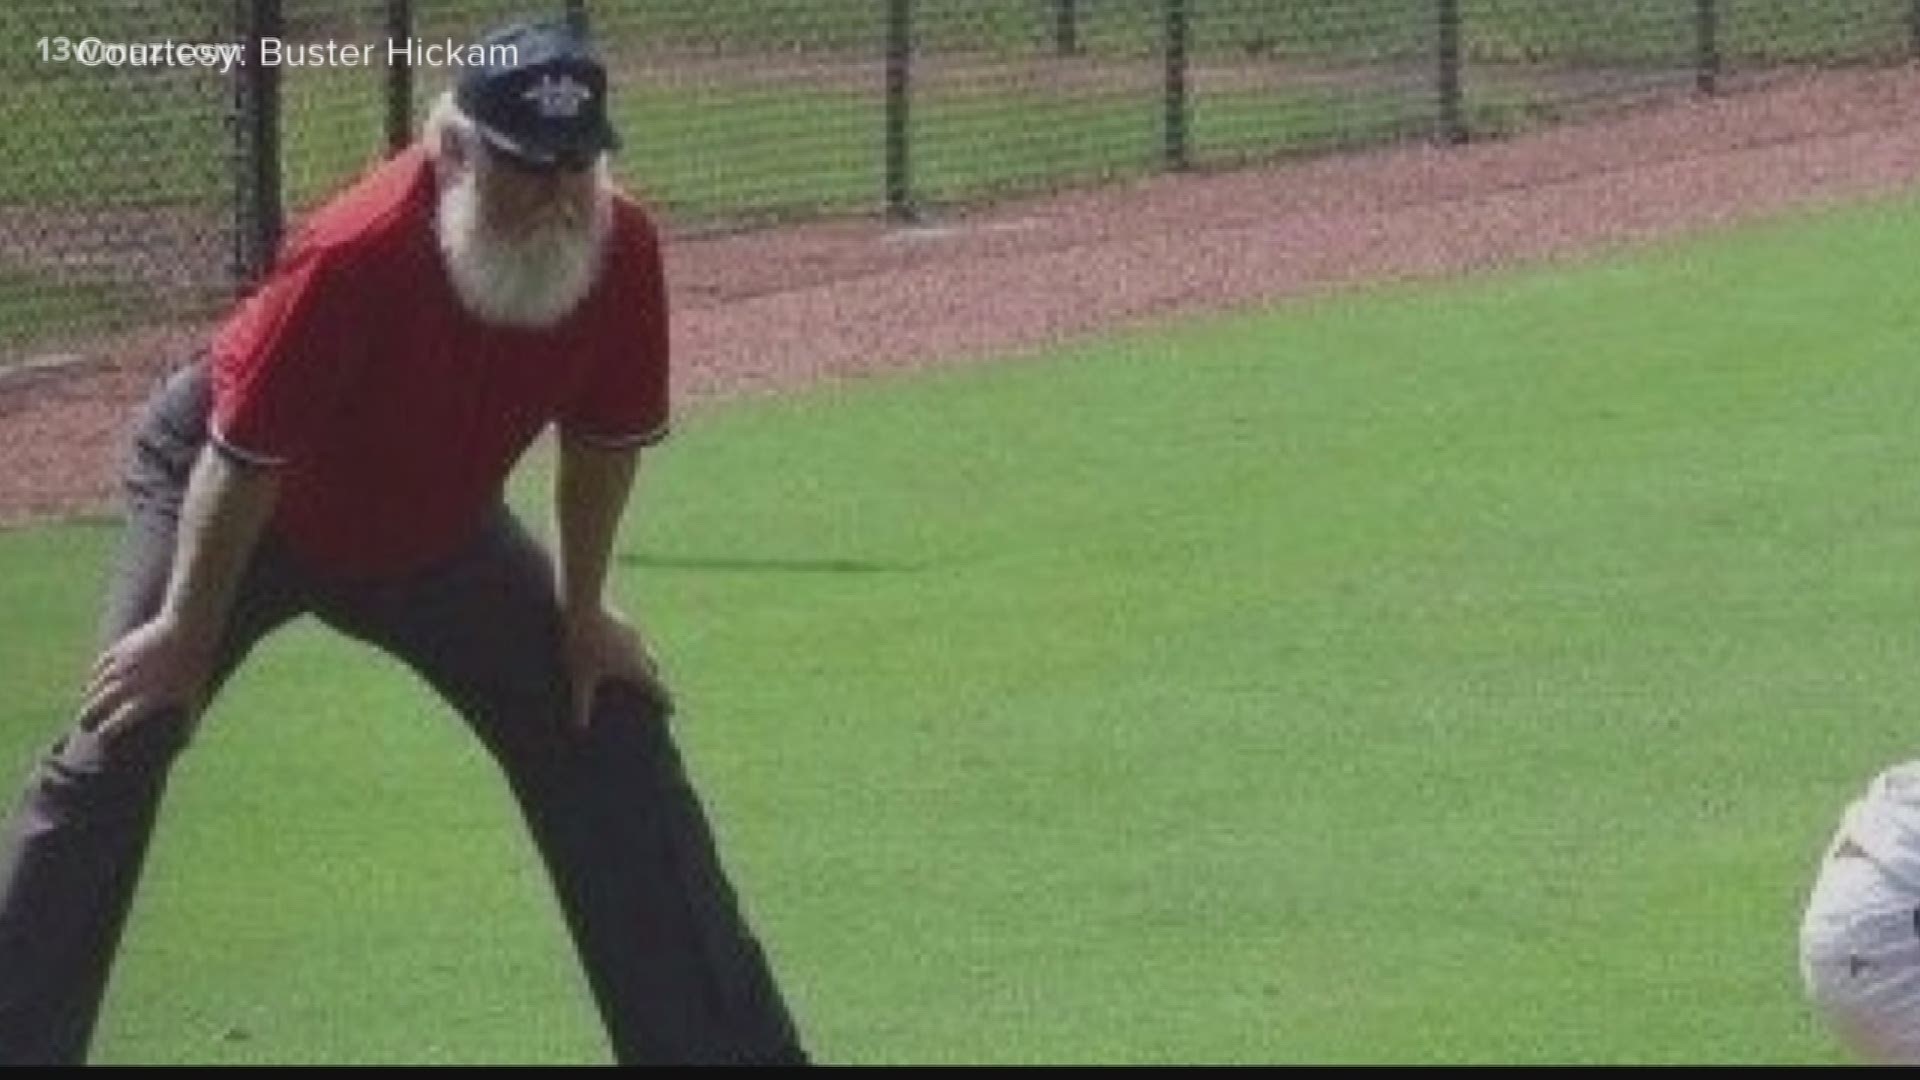 Roger Armstrong was an umpire for the Warner Robins Little League. Earlier this week, the league announced that a member had tested positive.